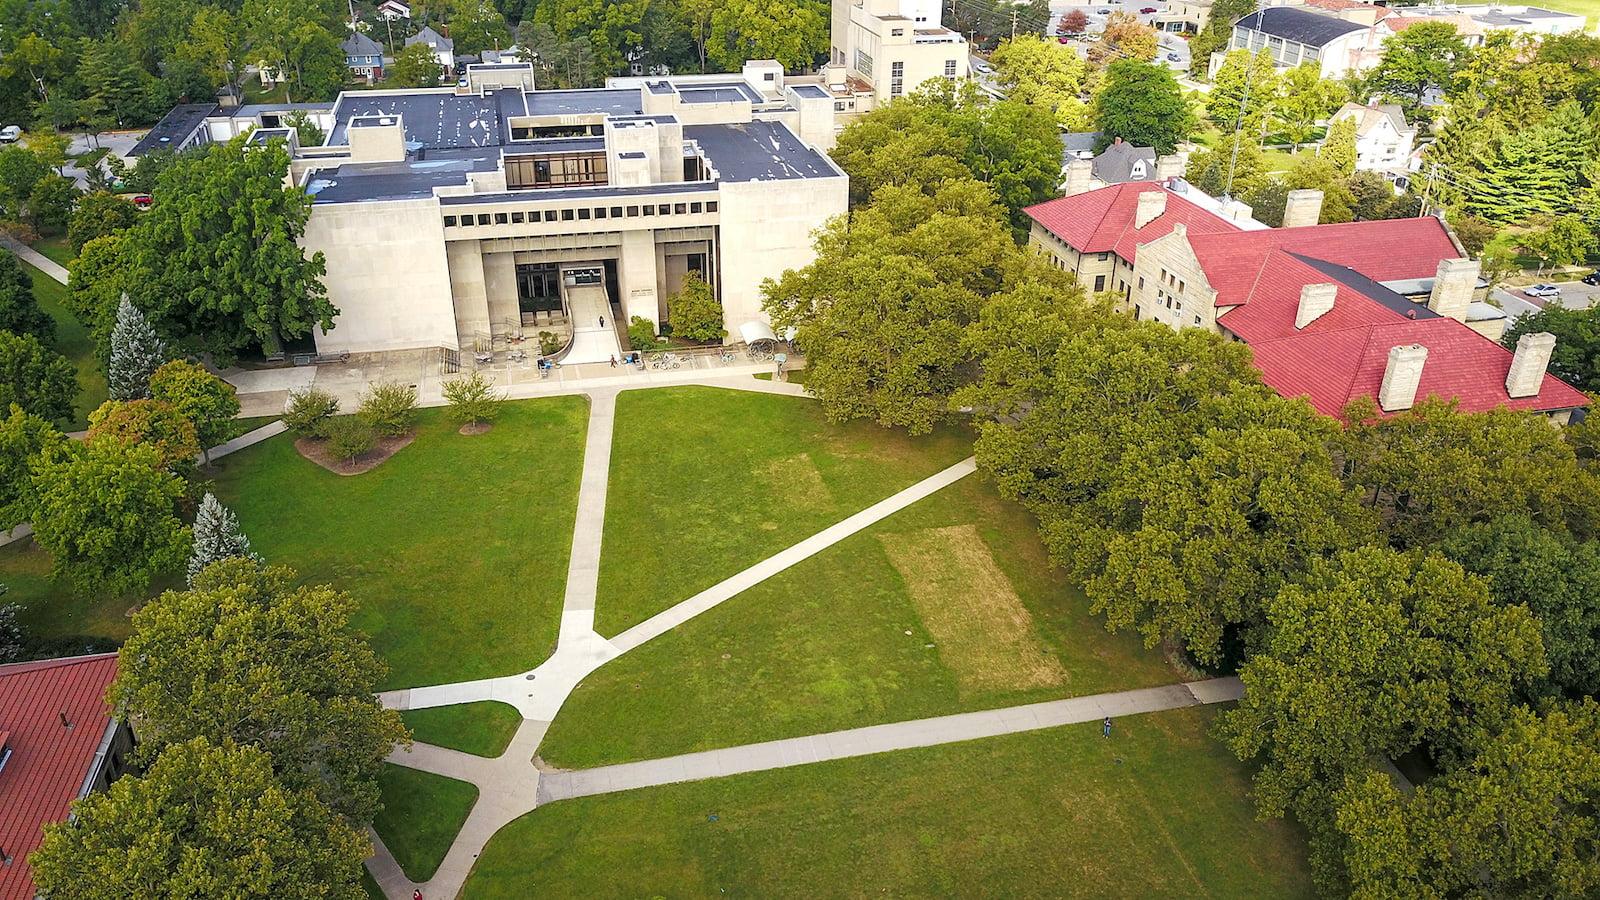 Aerial view of intersecting paths in a campus quad.